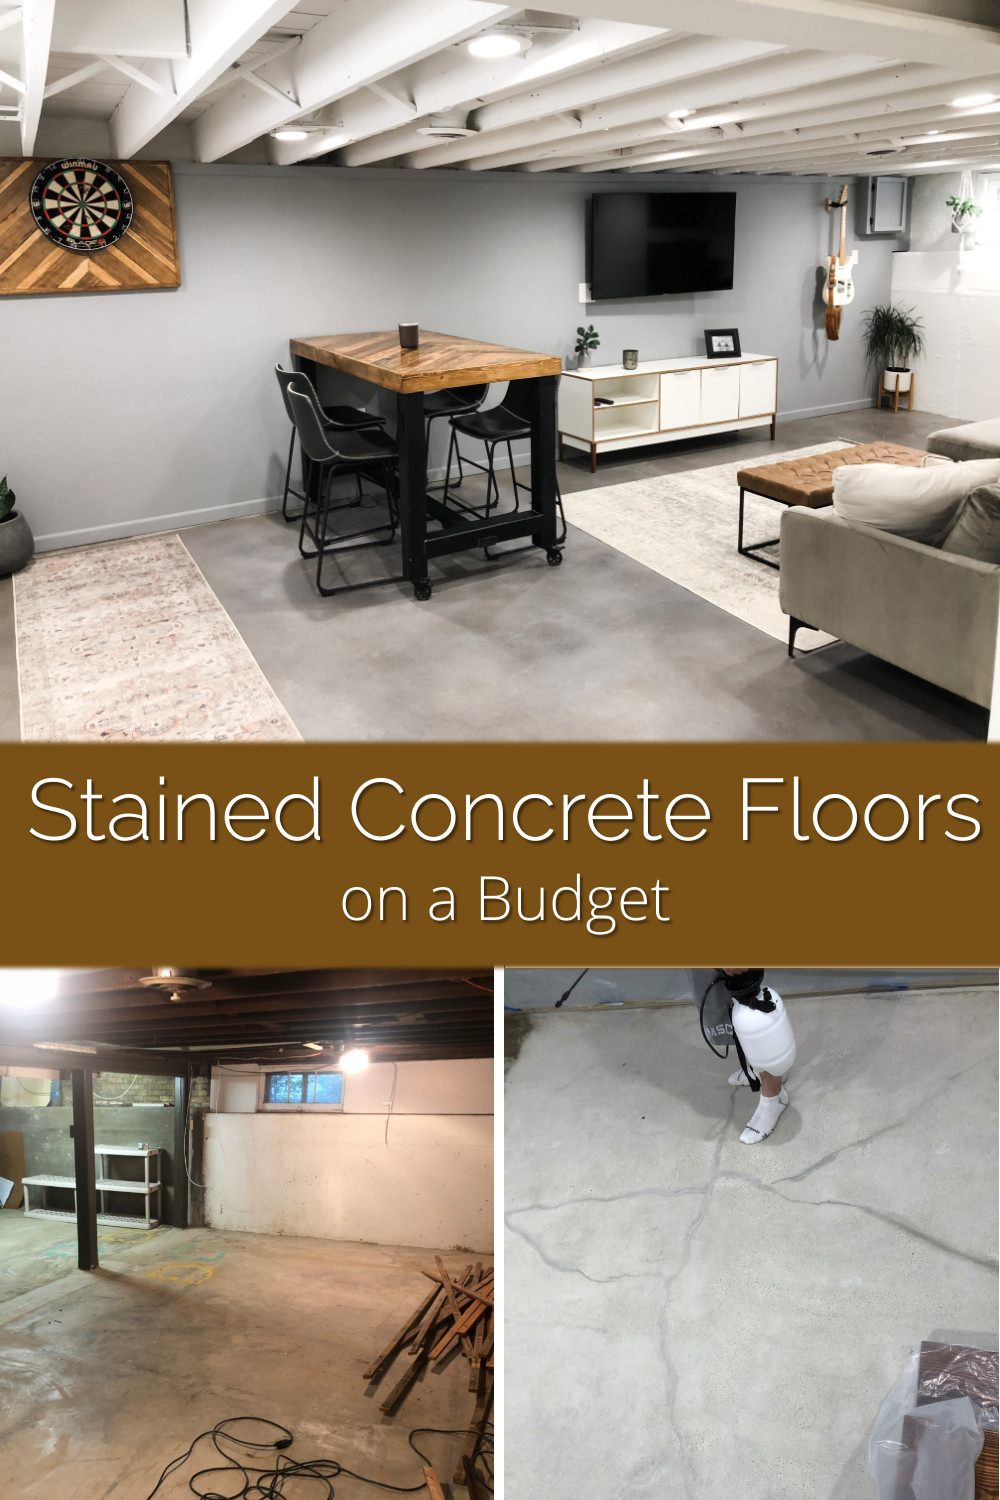 Stained Concrete Floors on a Budget